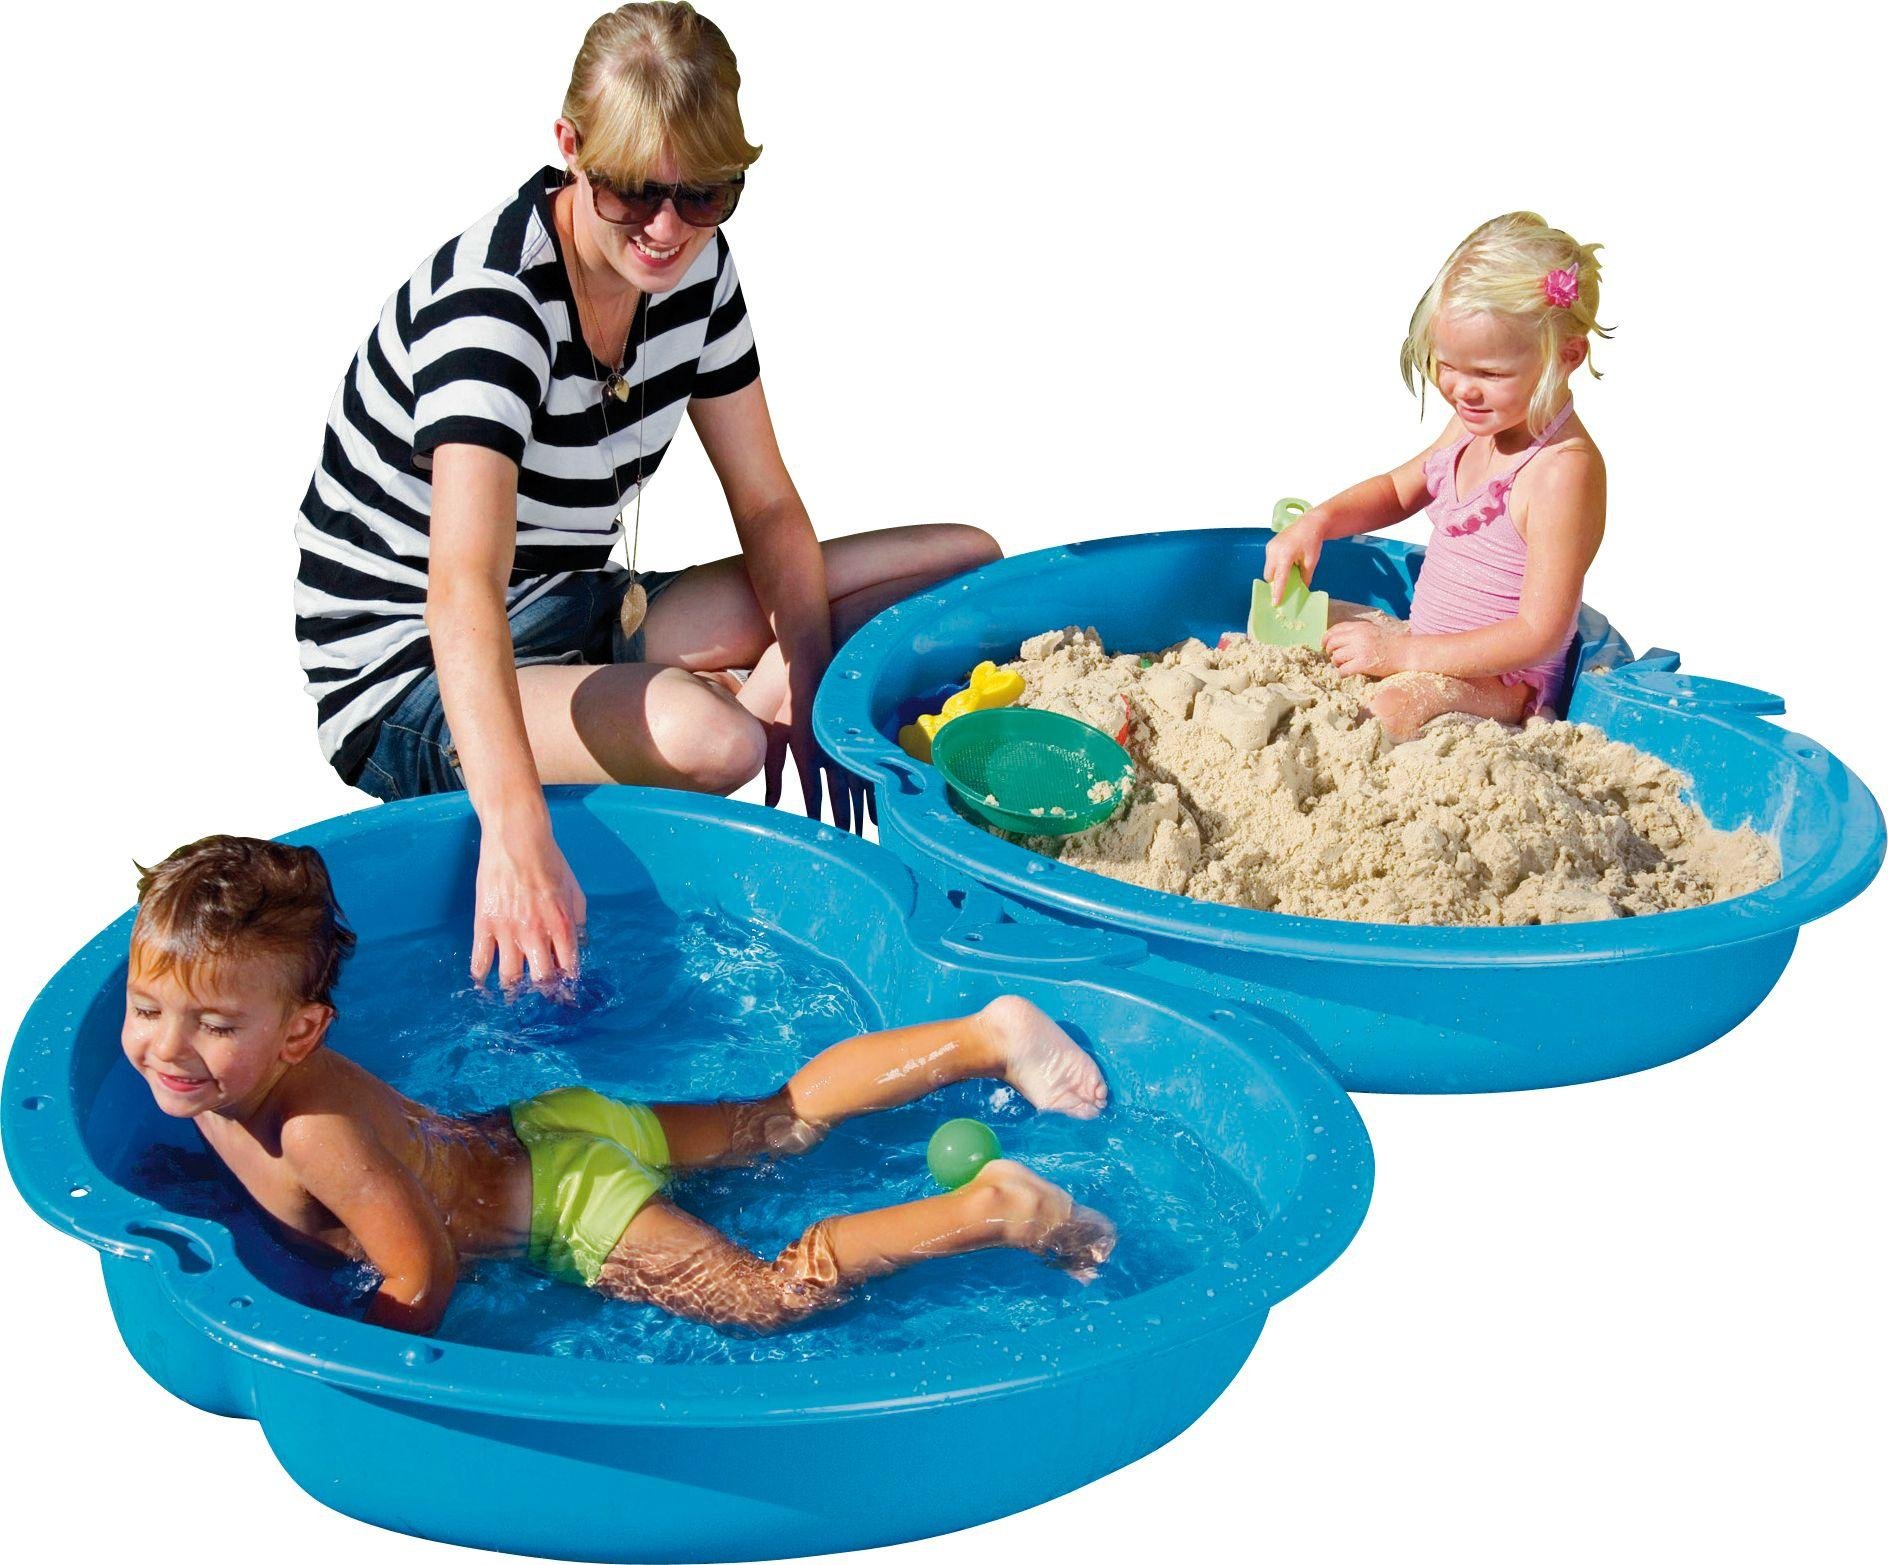 childrens sand and water pit